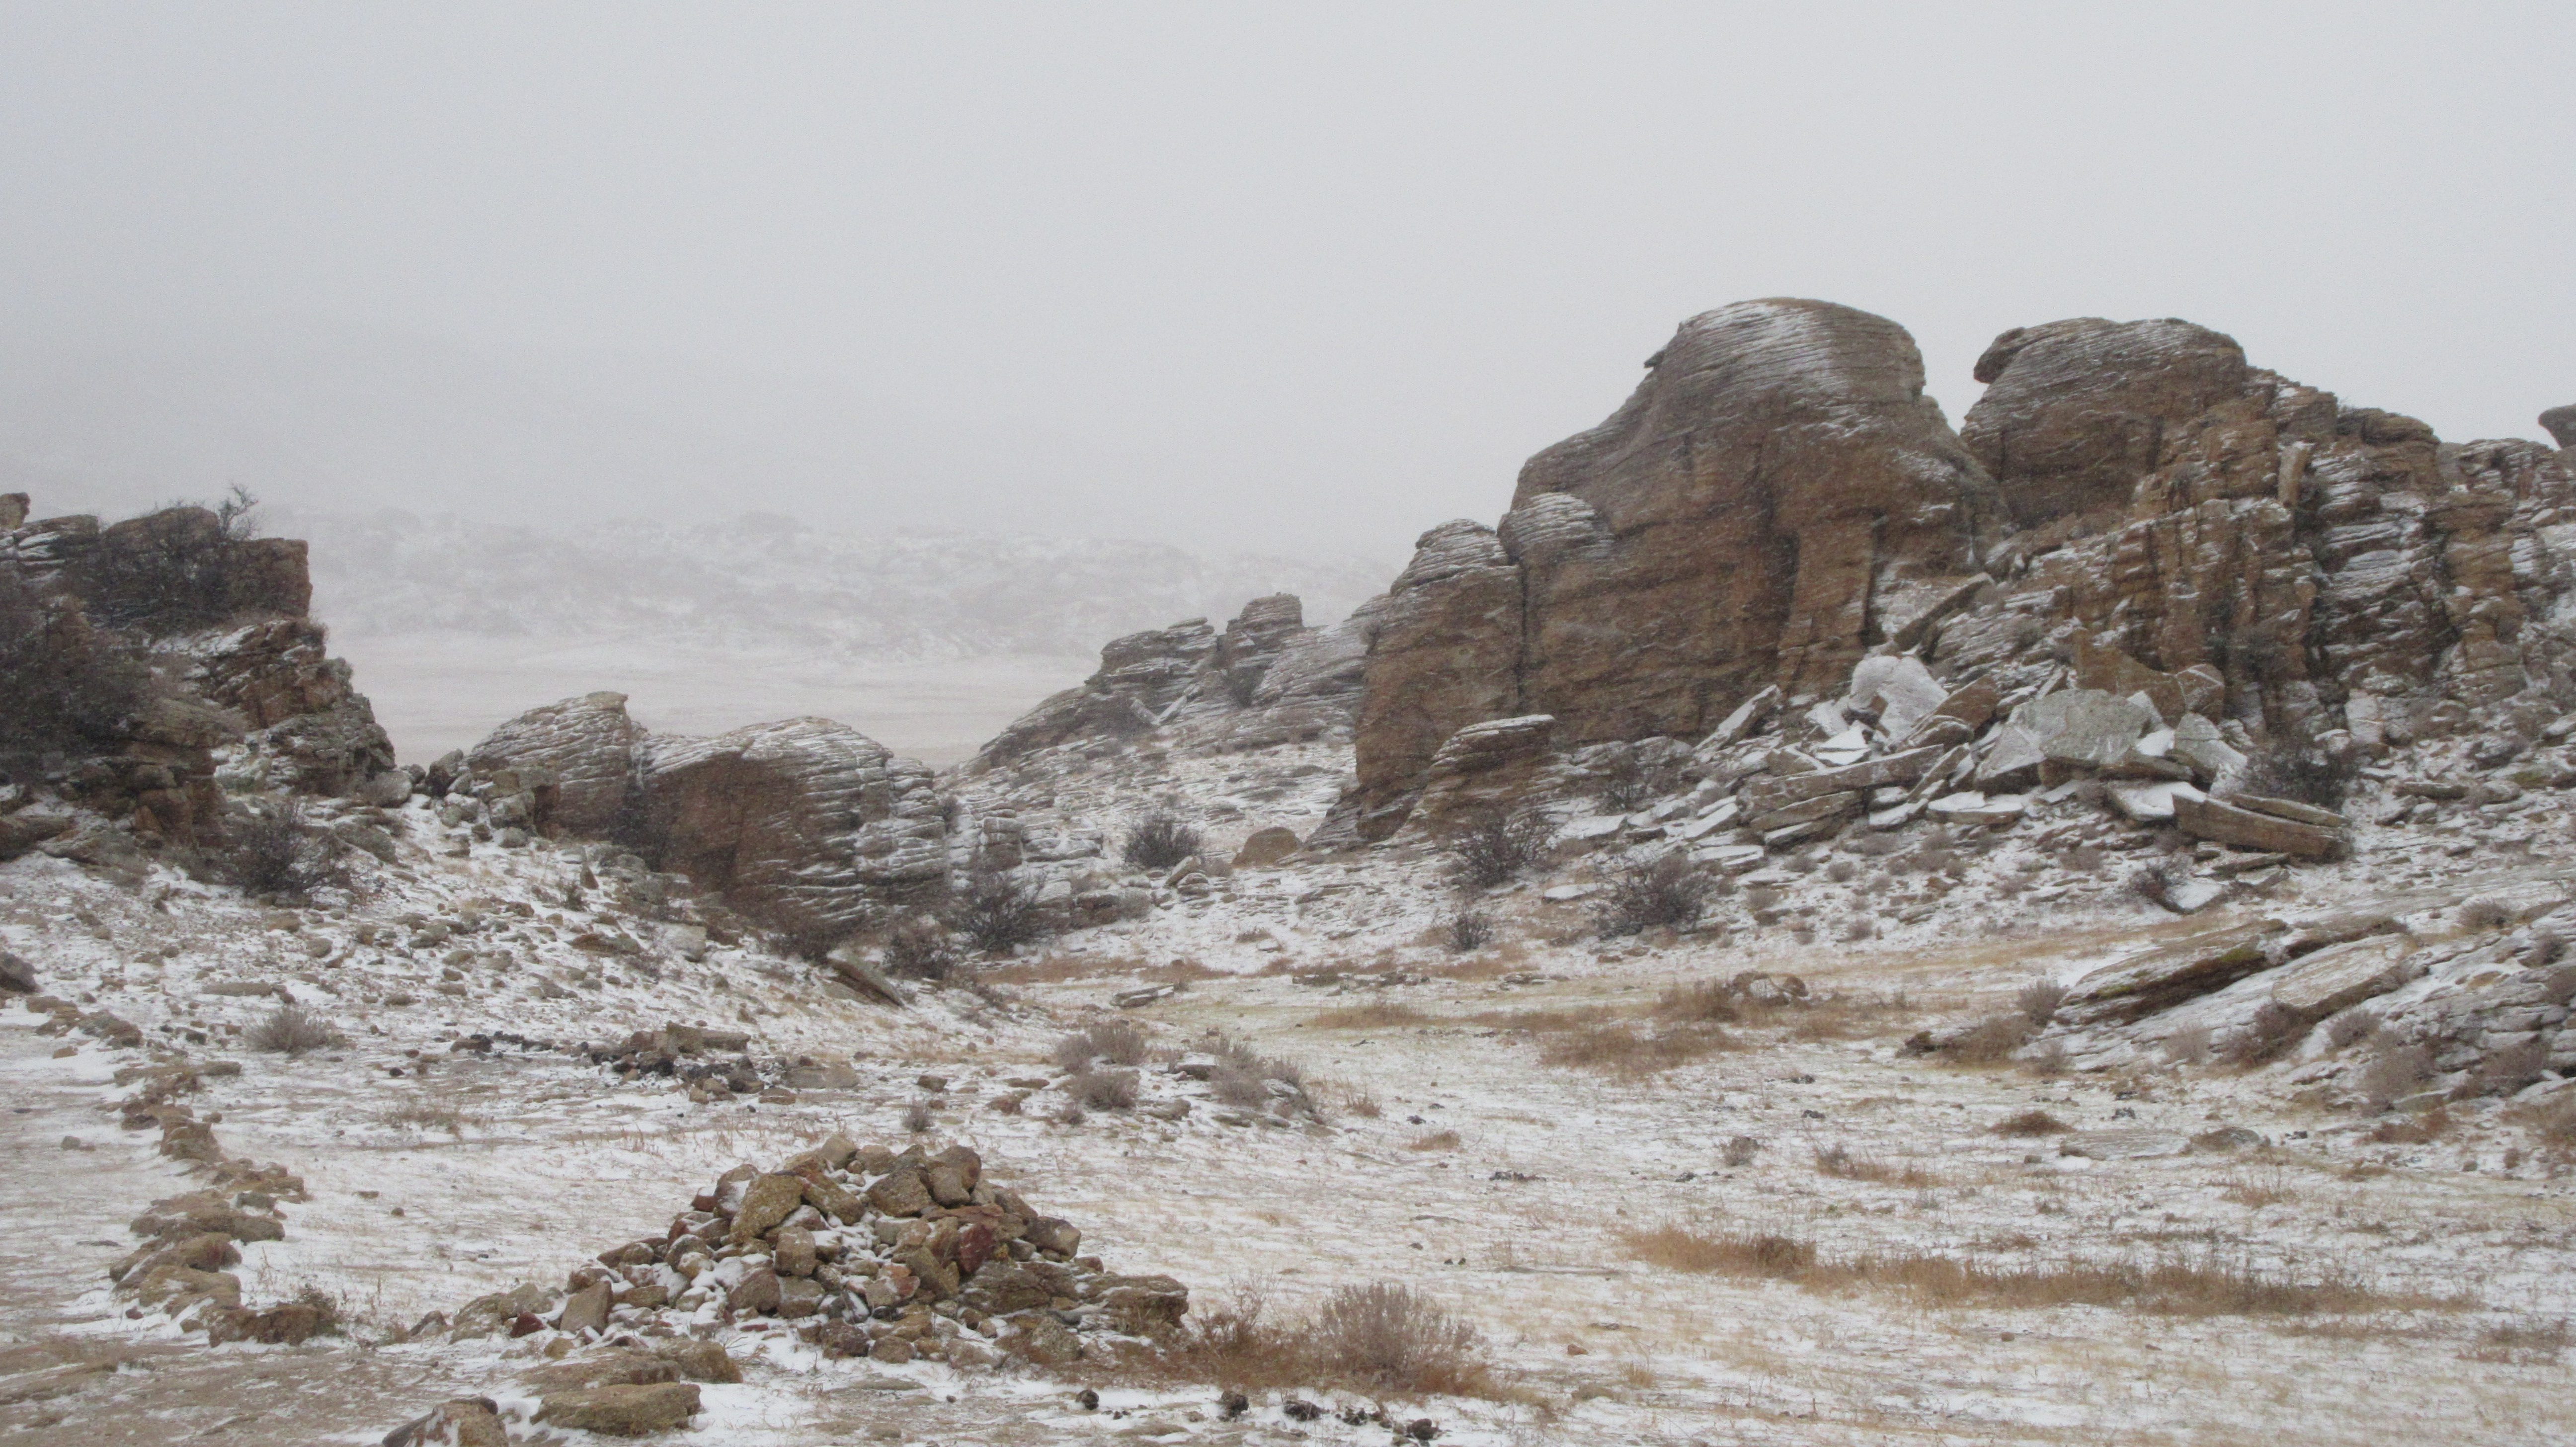 ALL WHITE. The snow obscured the Rock Formation and the surrounding landscape during the first few days of my trip to the Gobi 